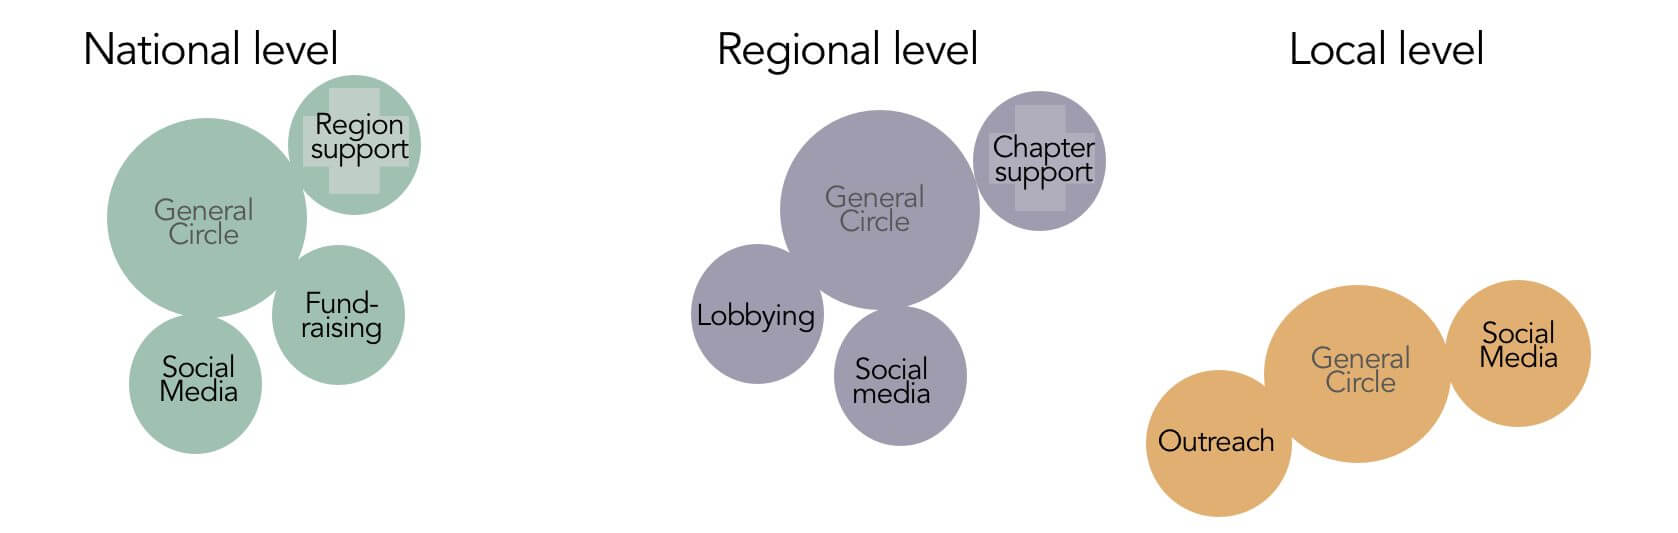 national regional local 10a - national regional and local sociocracy,multi-layered organizations,sociocracy national organization,national - Sociocracy For All